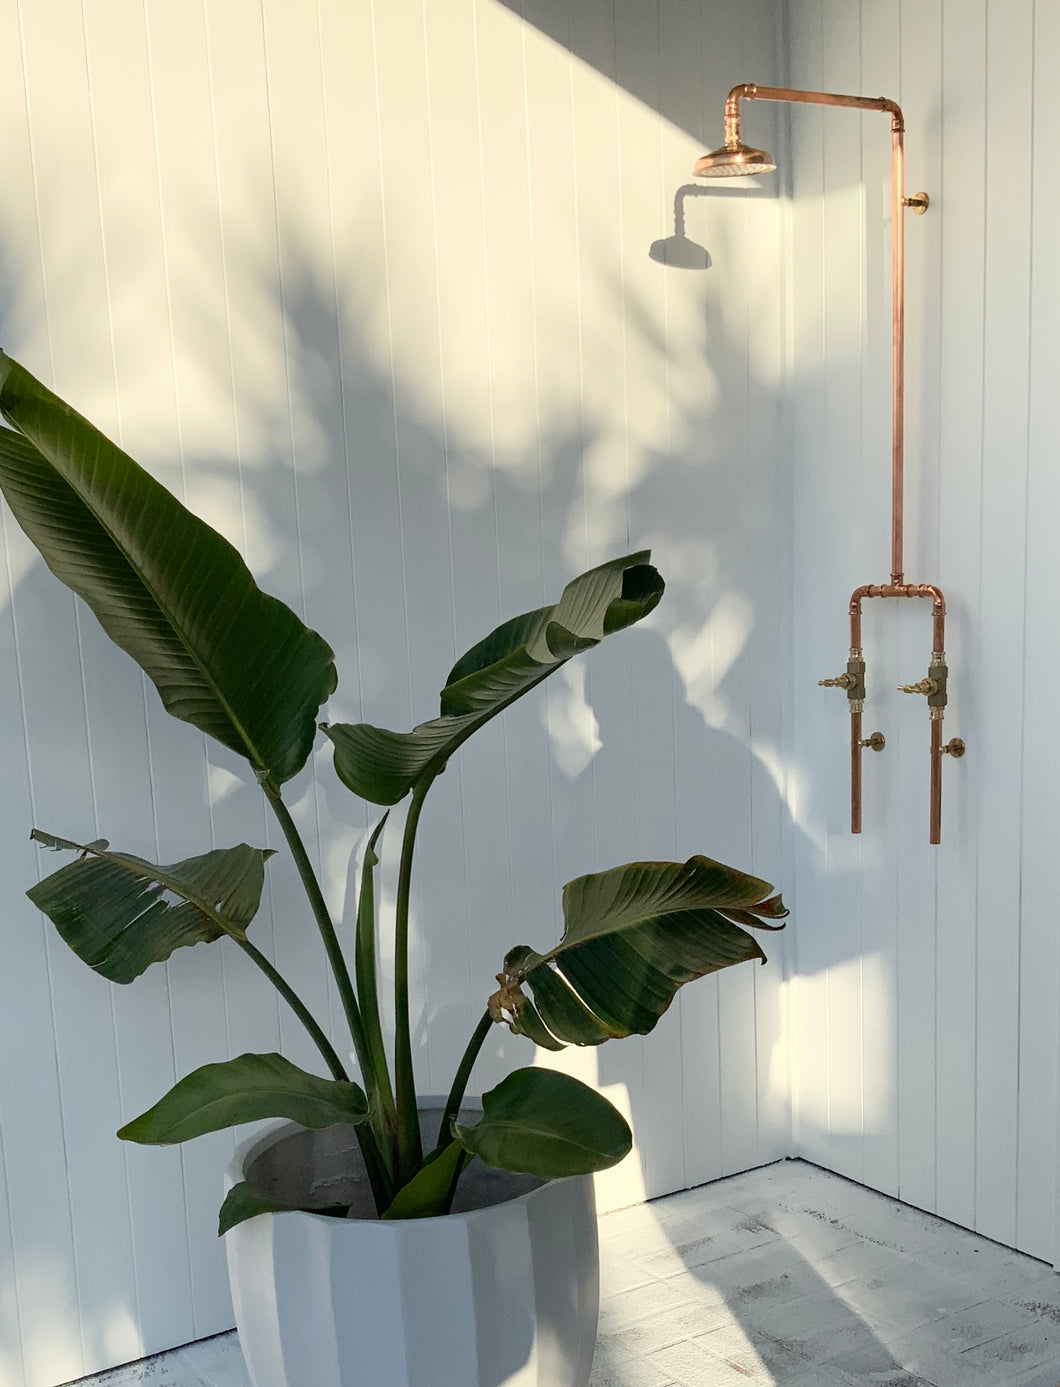 OUTDOOR BRASS AND COPPER SHOWER